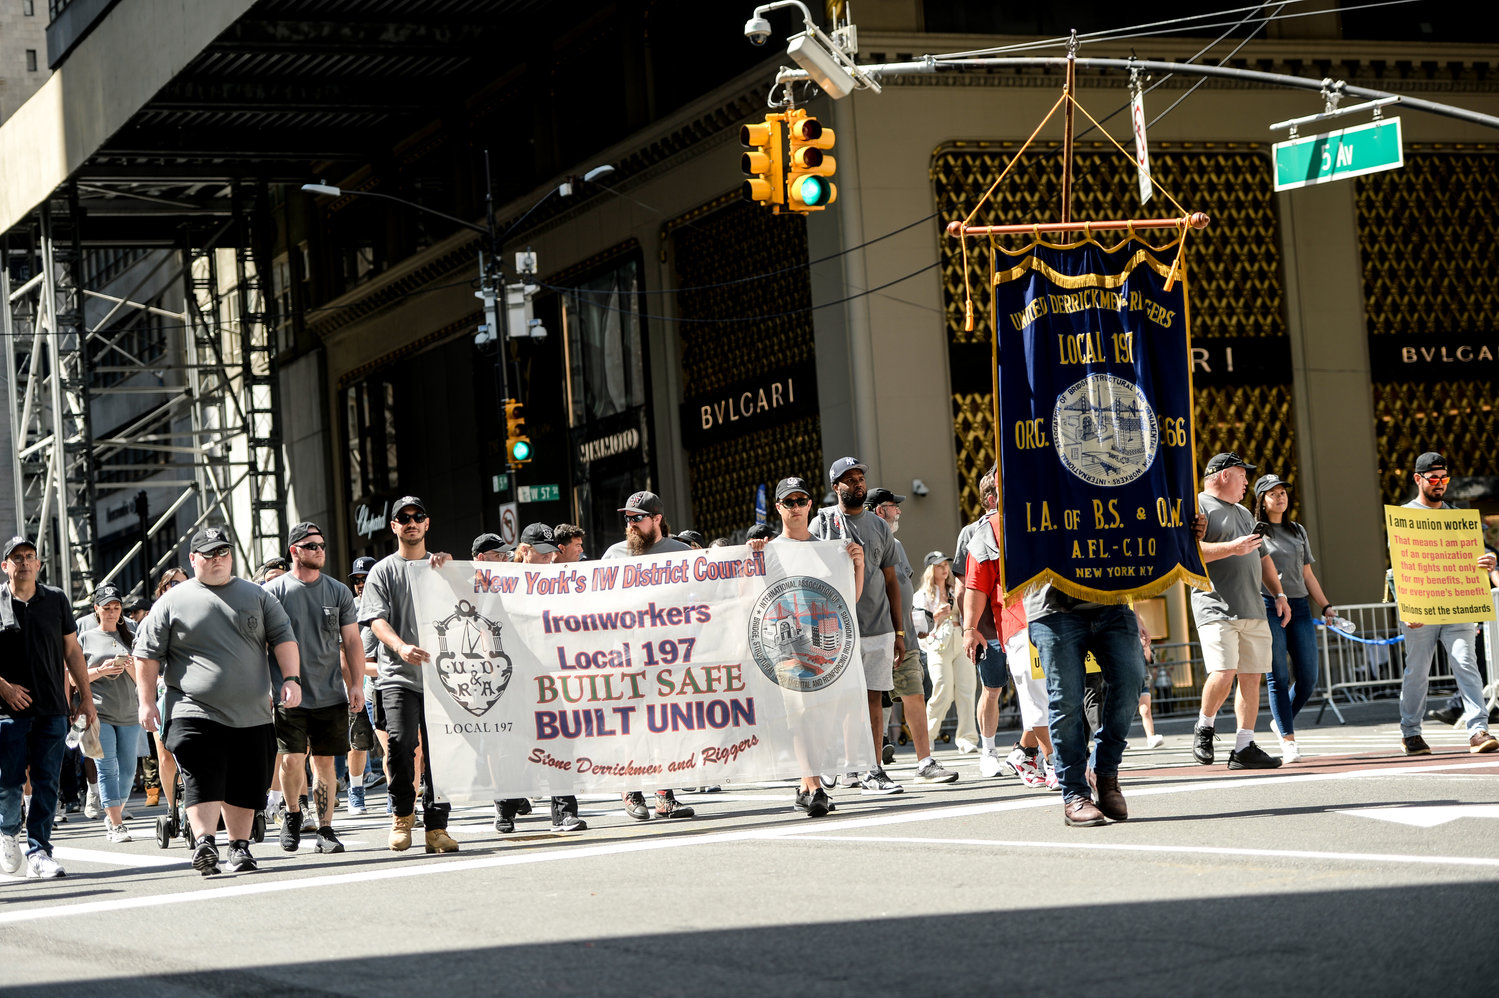 Hundreds of union workers, officials and government representatives participated in the Labor Day Parade along Fifth Avenue Sept. 10. According to recent research, union assets nearly doubled between 2010 and 2020, climbing from about $15 billion to $29 billion.